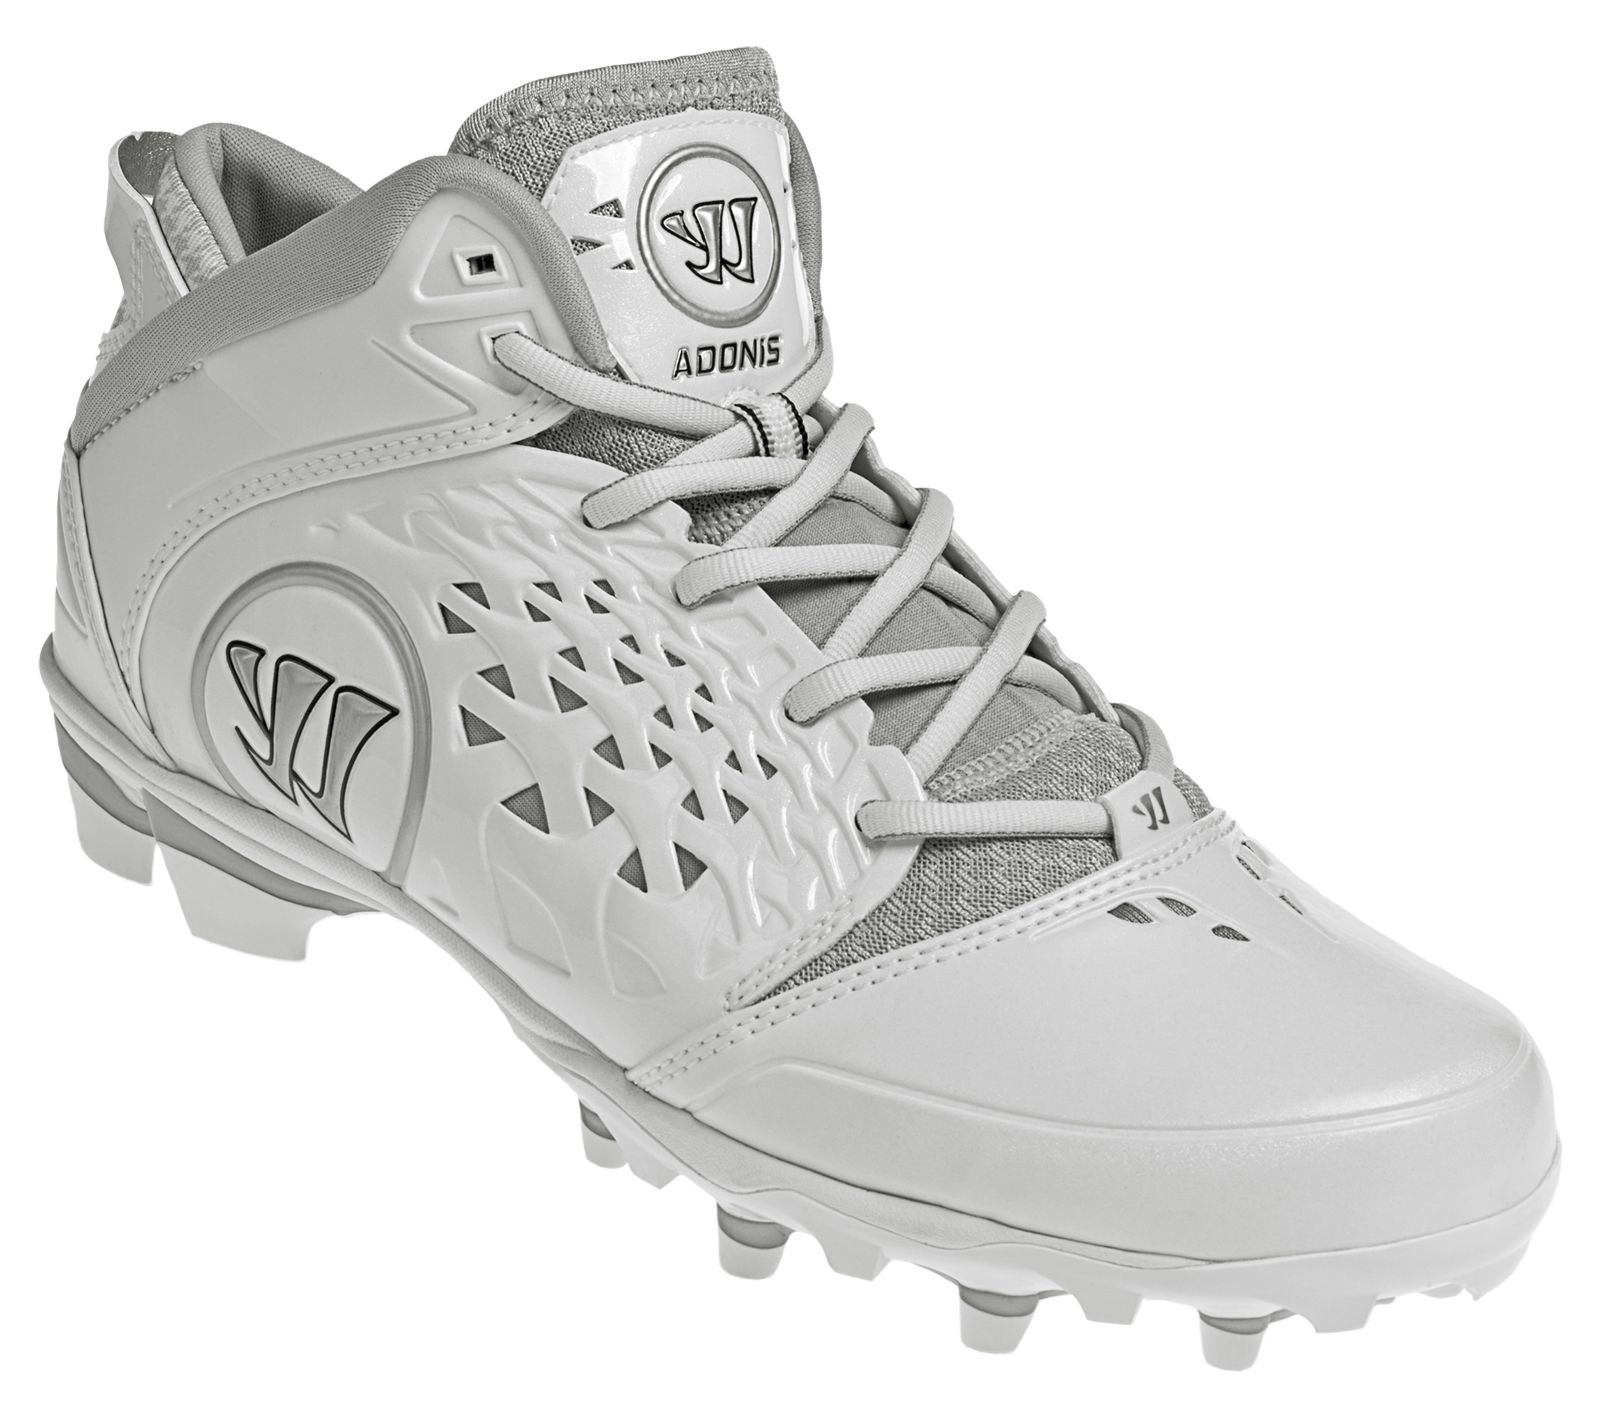 Adonis Cleat, White with Silver image number 6